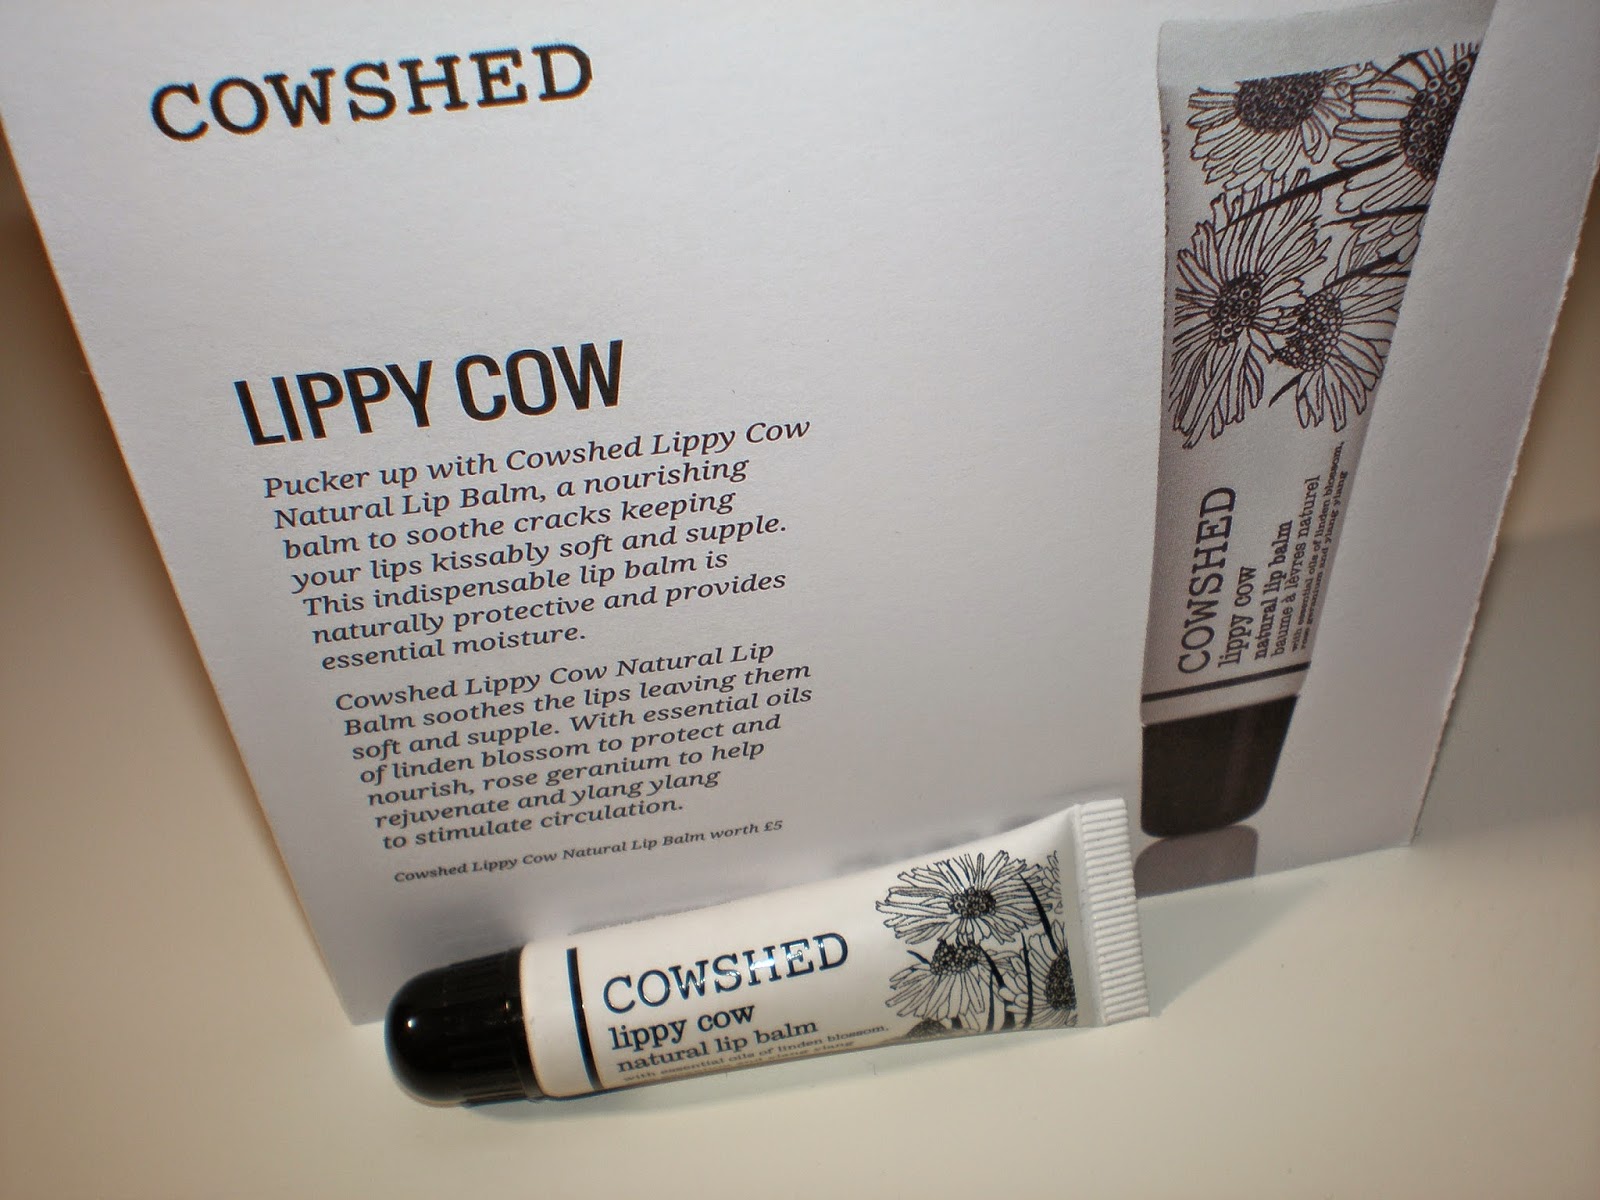 Cowshed Lippy Cow Lip Balm